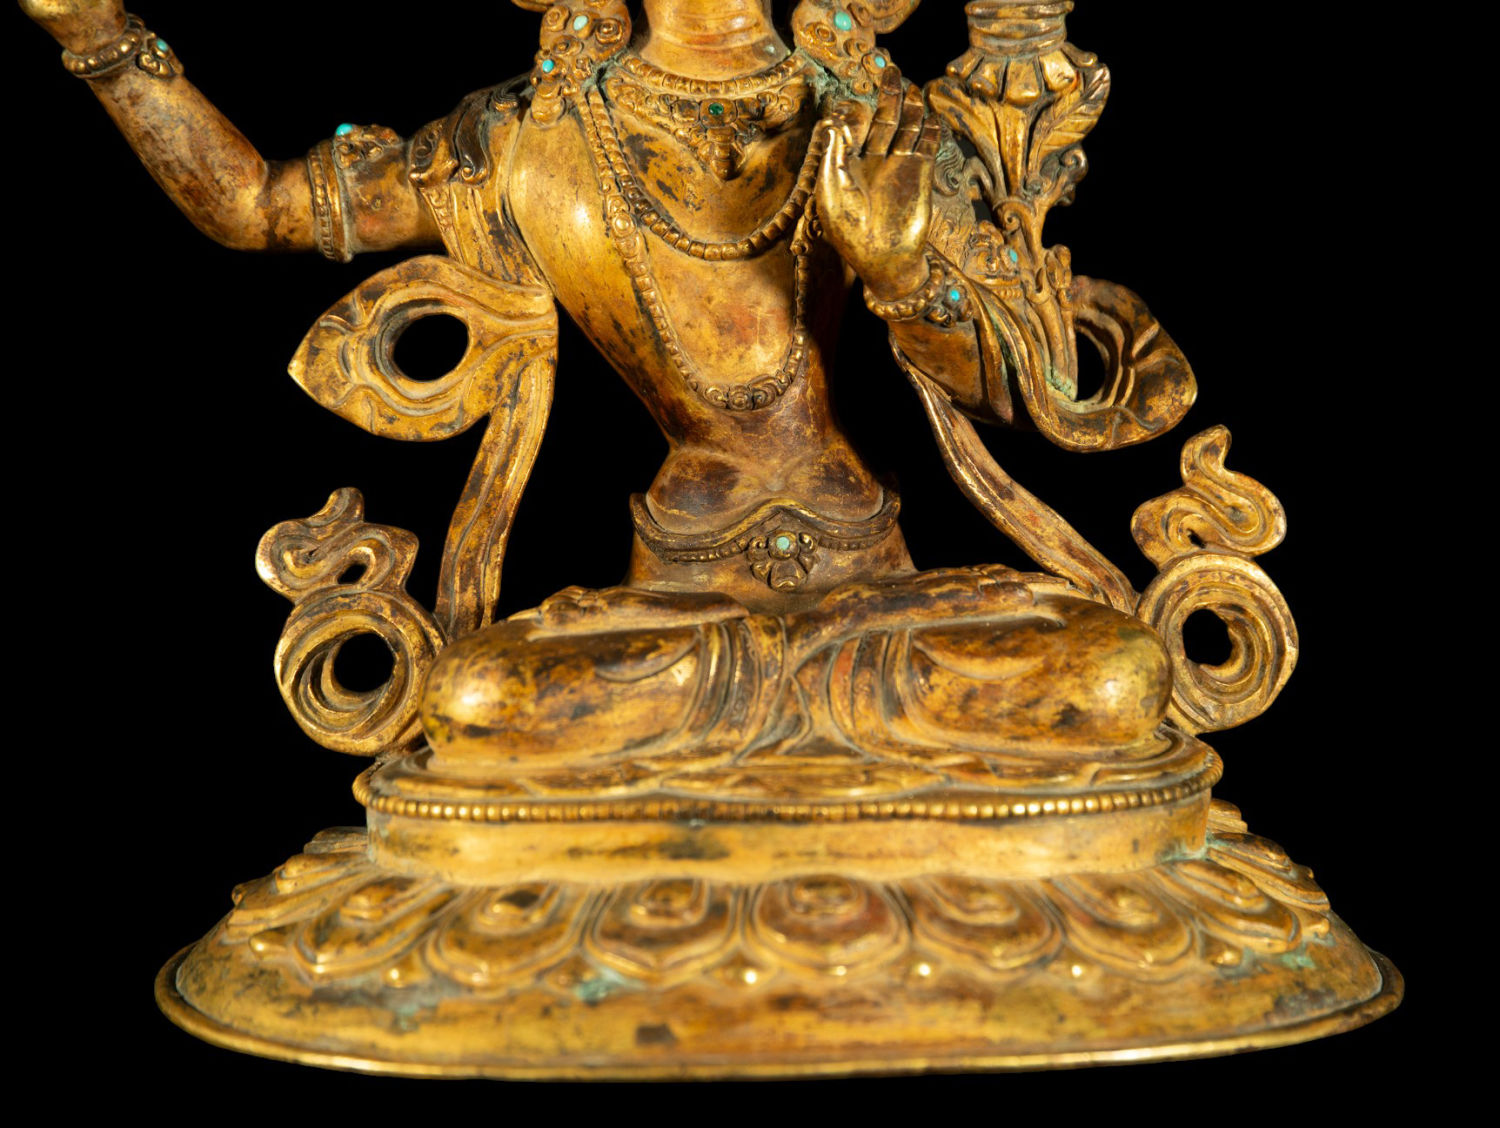 Exquisite Goddess Tara in gilt repoussé copper, Chinese school, Tibet, 19th century - Image 3 of 8